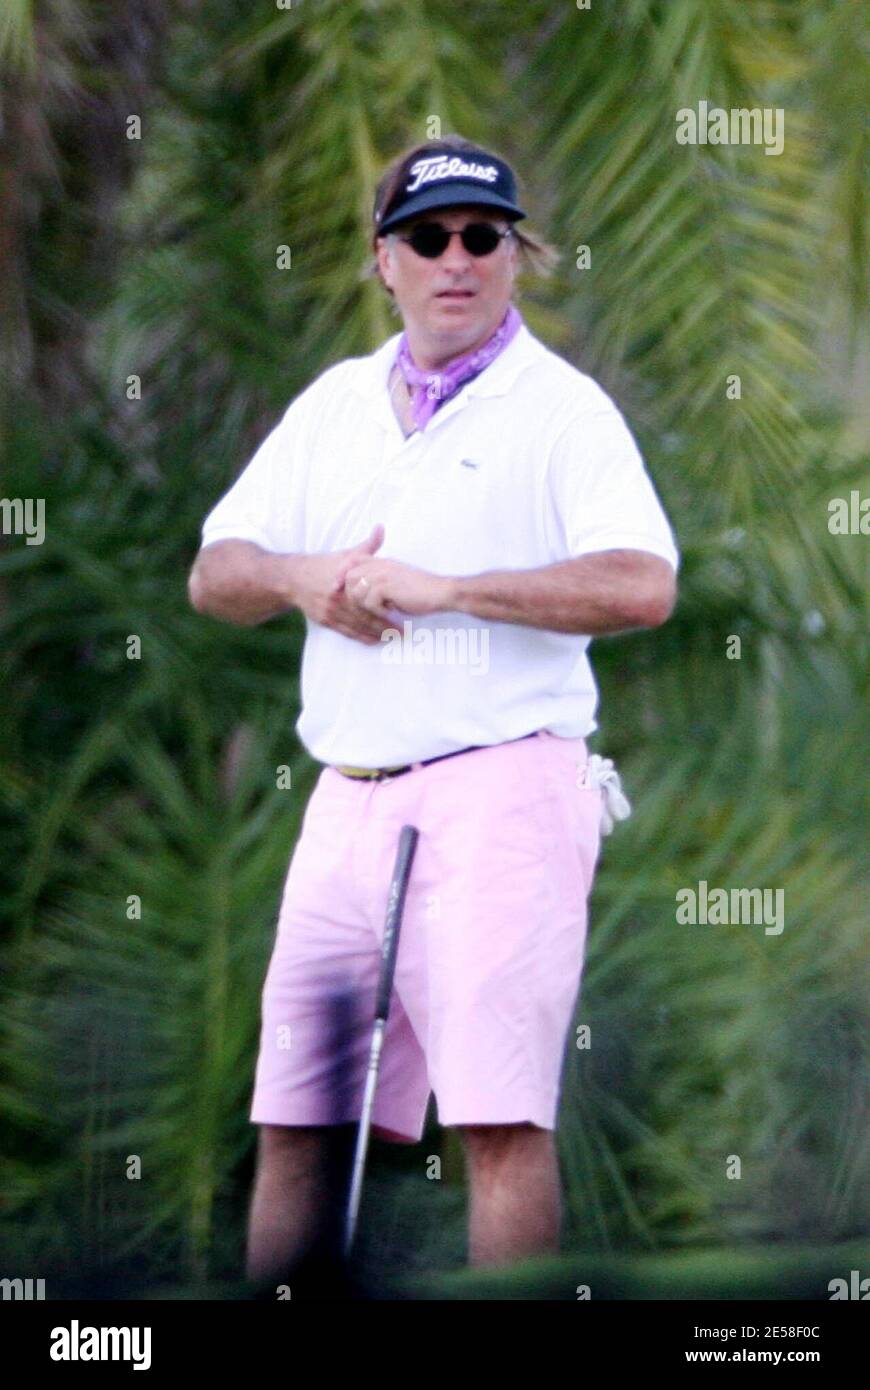 Andy Garcia hits the greens in pink shorts and matching cravat during an  afternoon's golf game with pals at a Miami country club. Miami, Fla.  7/31/07. [[tag]] Stock Photo - Alamy